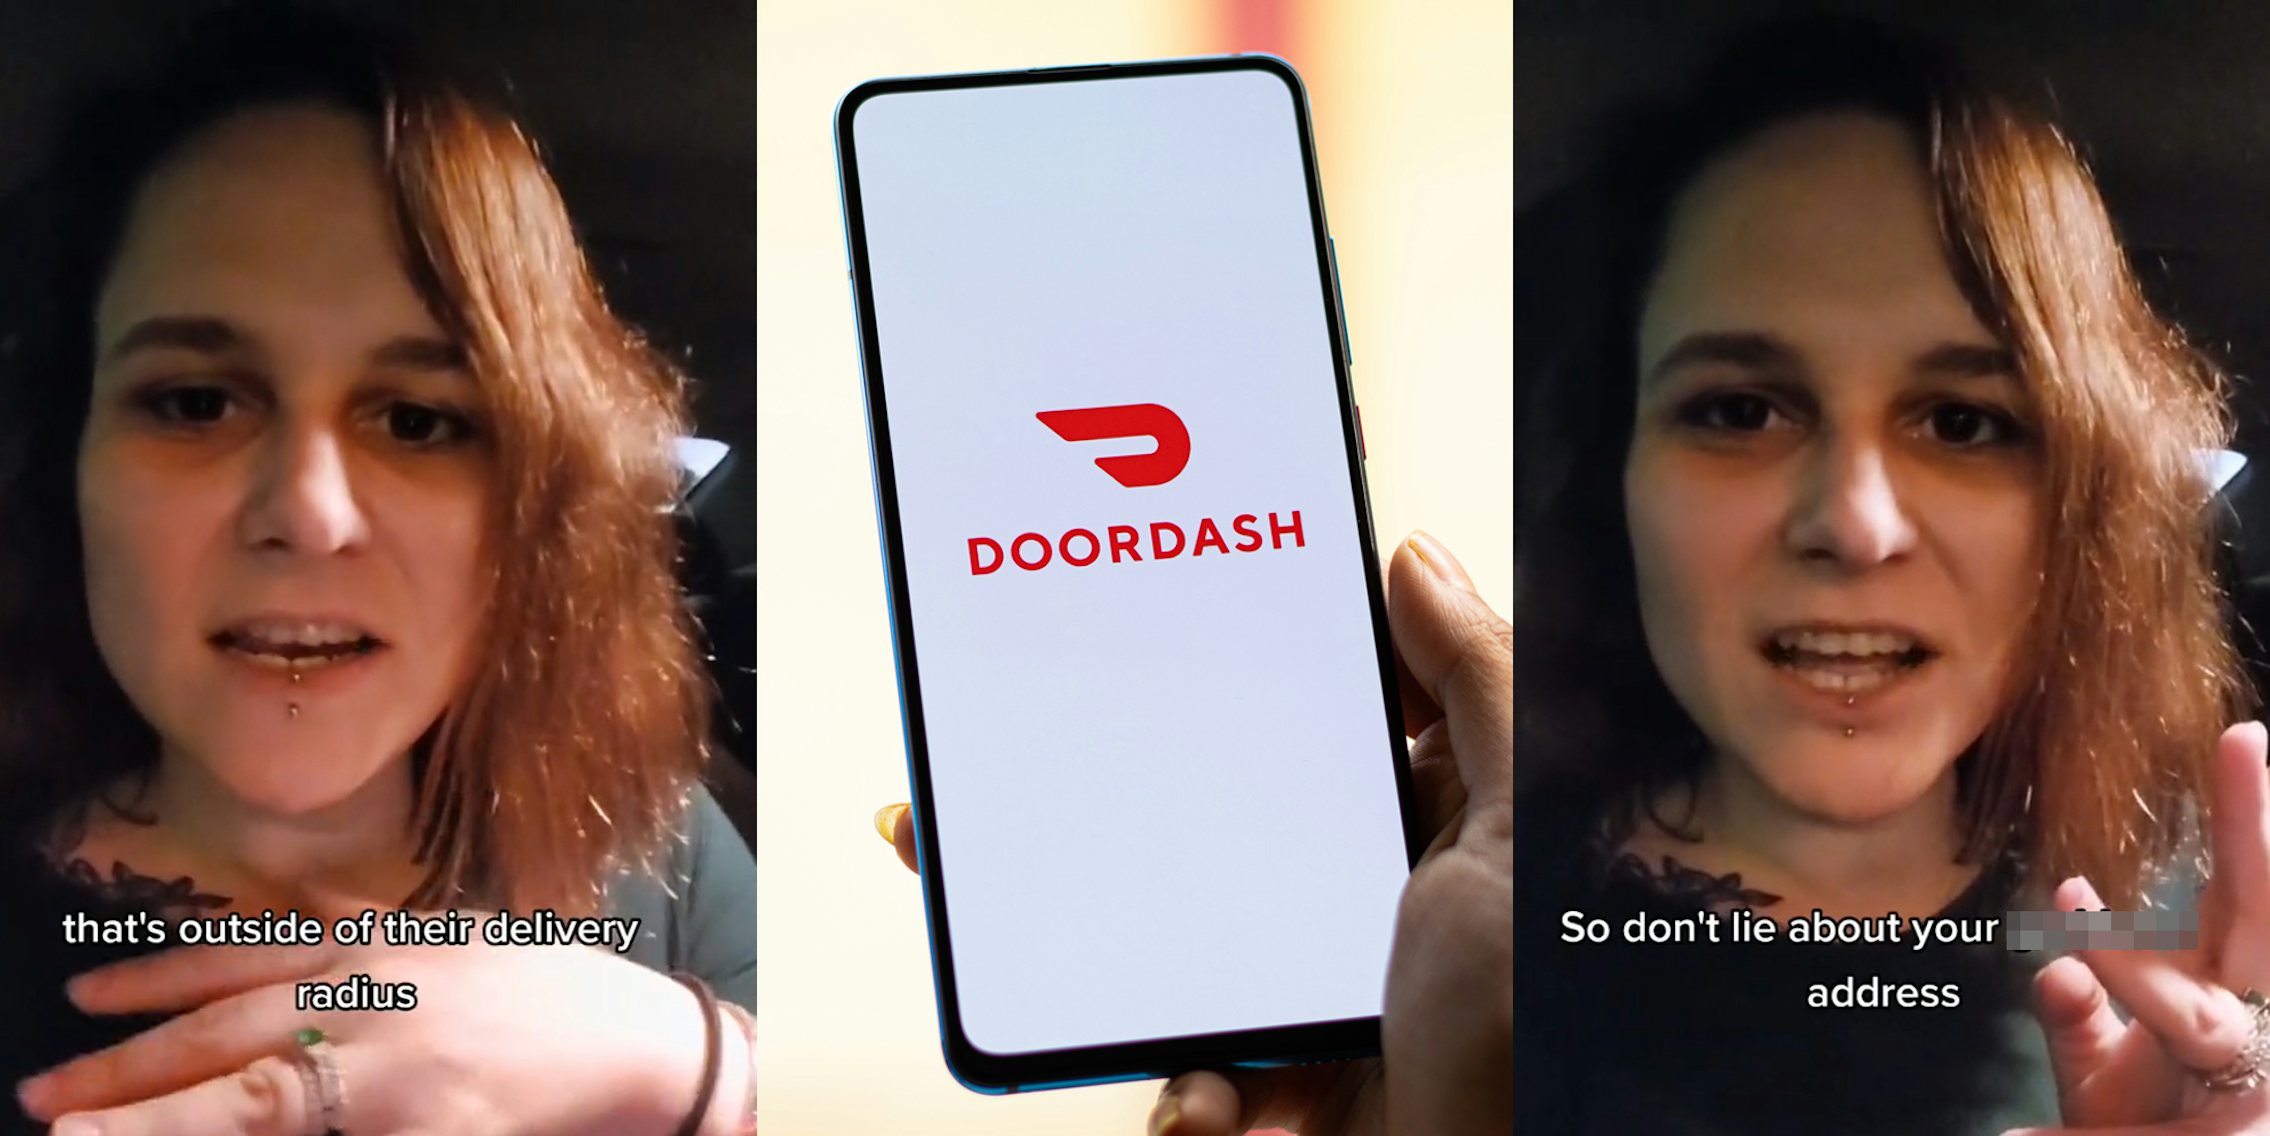 How do I contact DoorDashDrive for an issue with delivery?